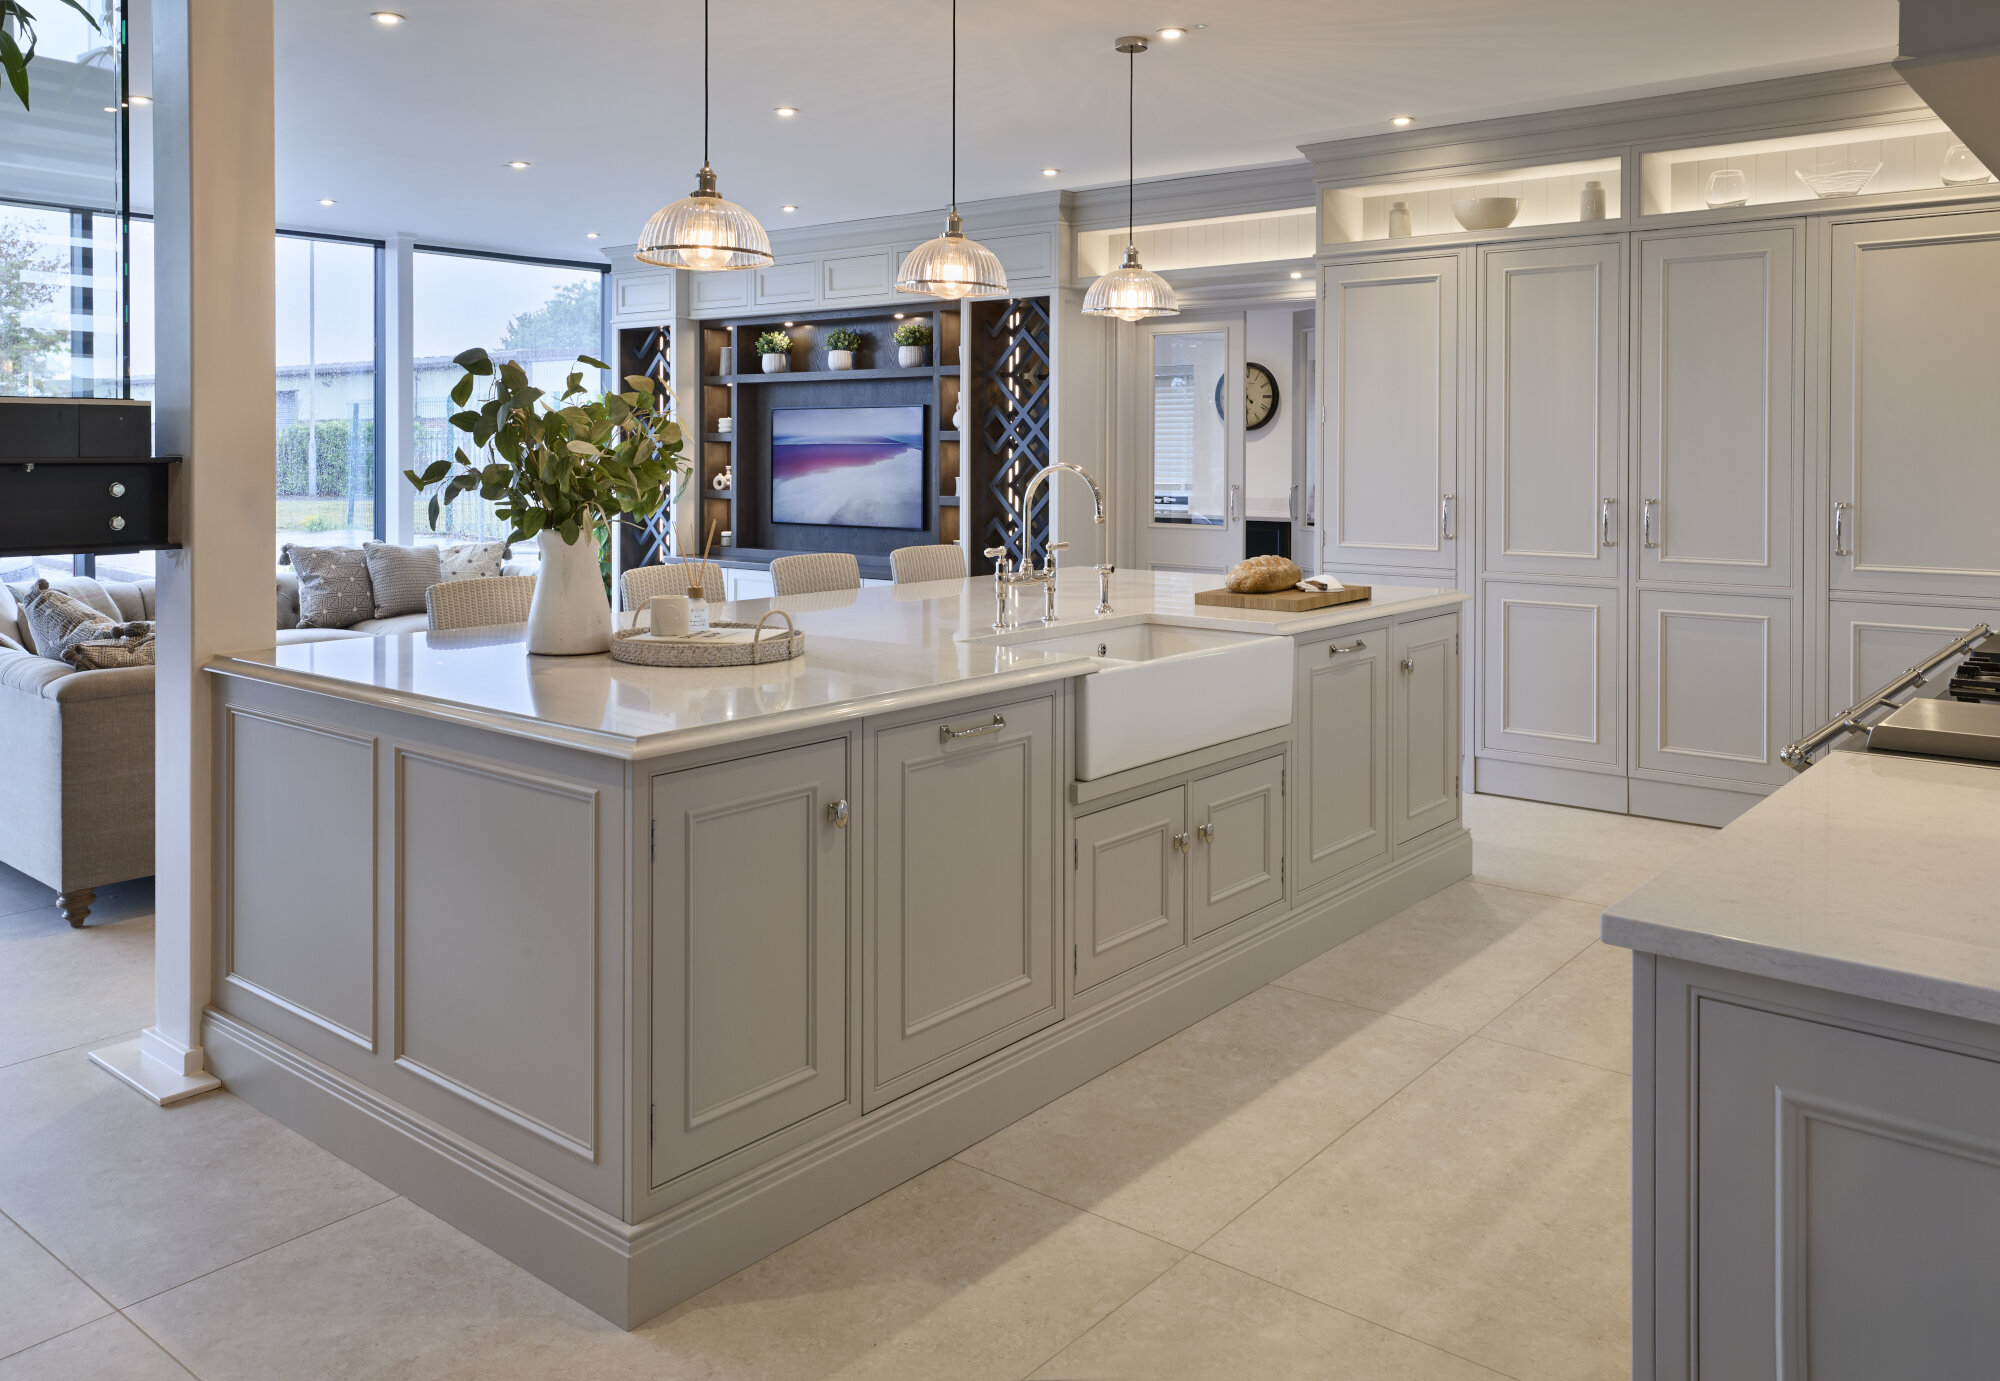 This Bespoke Kitchen Design is on display in our showroom near New Mills